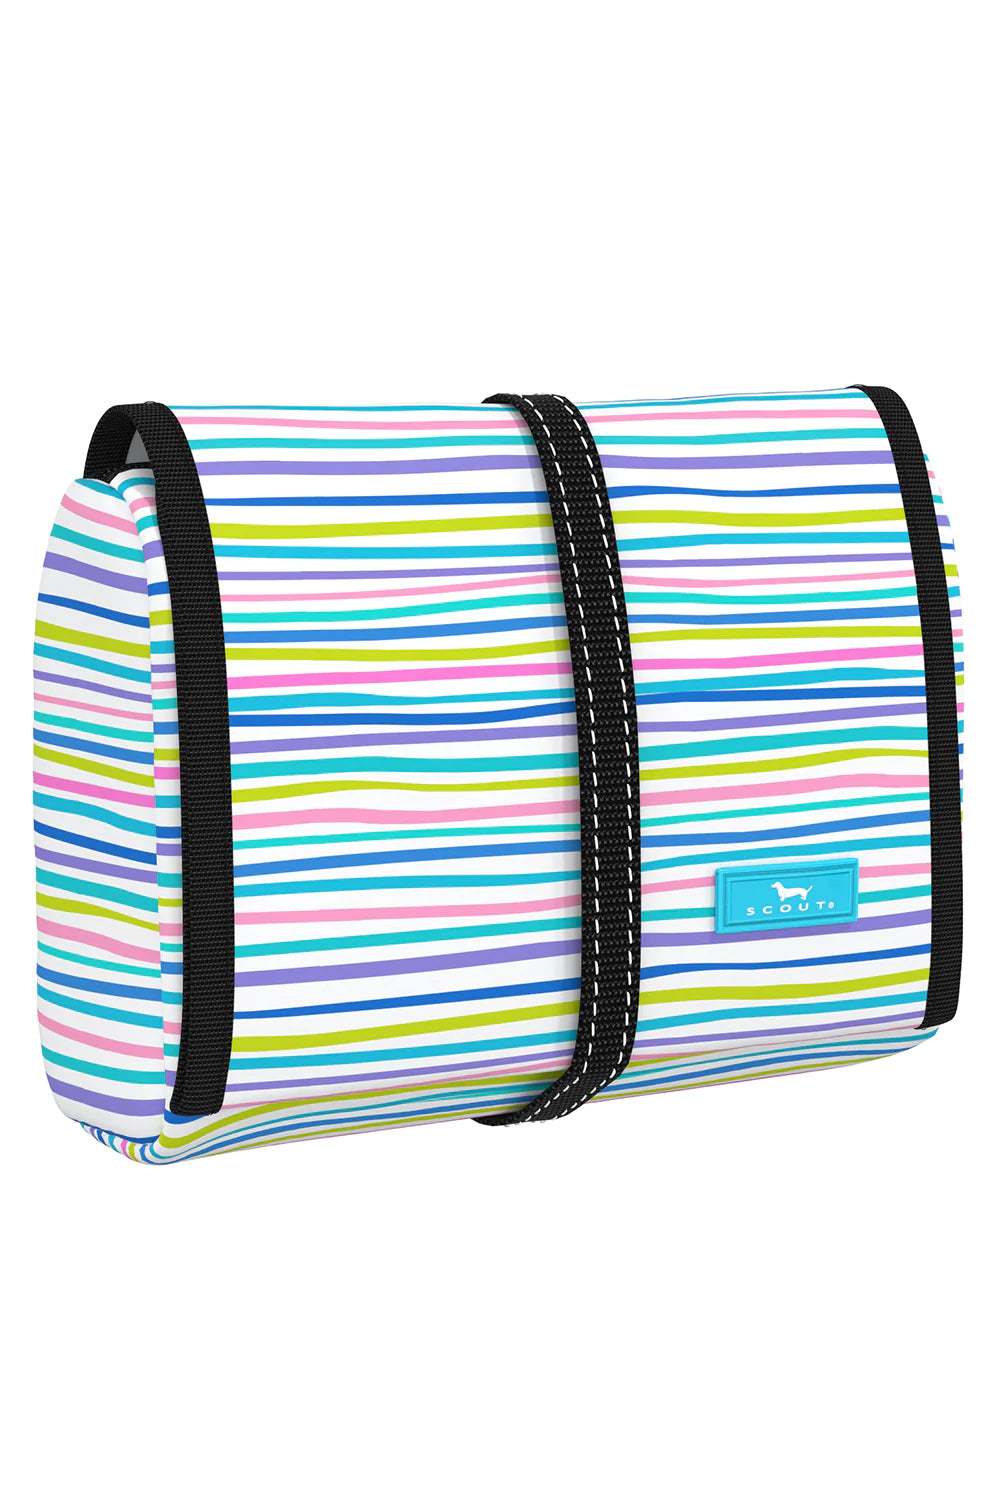 Beauty Burrito Hanging Toiletry Bag | Silly Spring